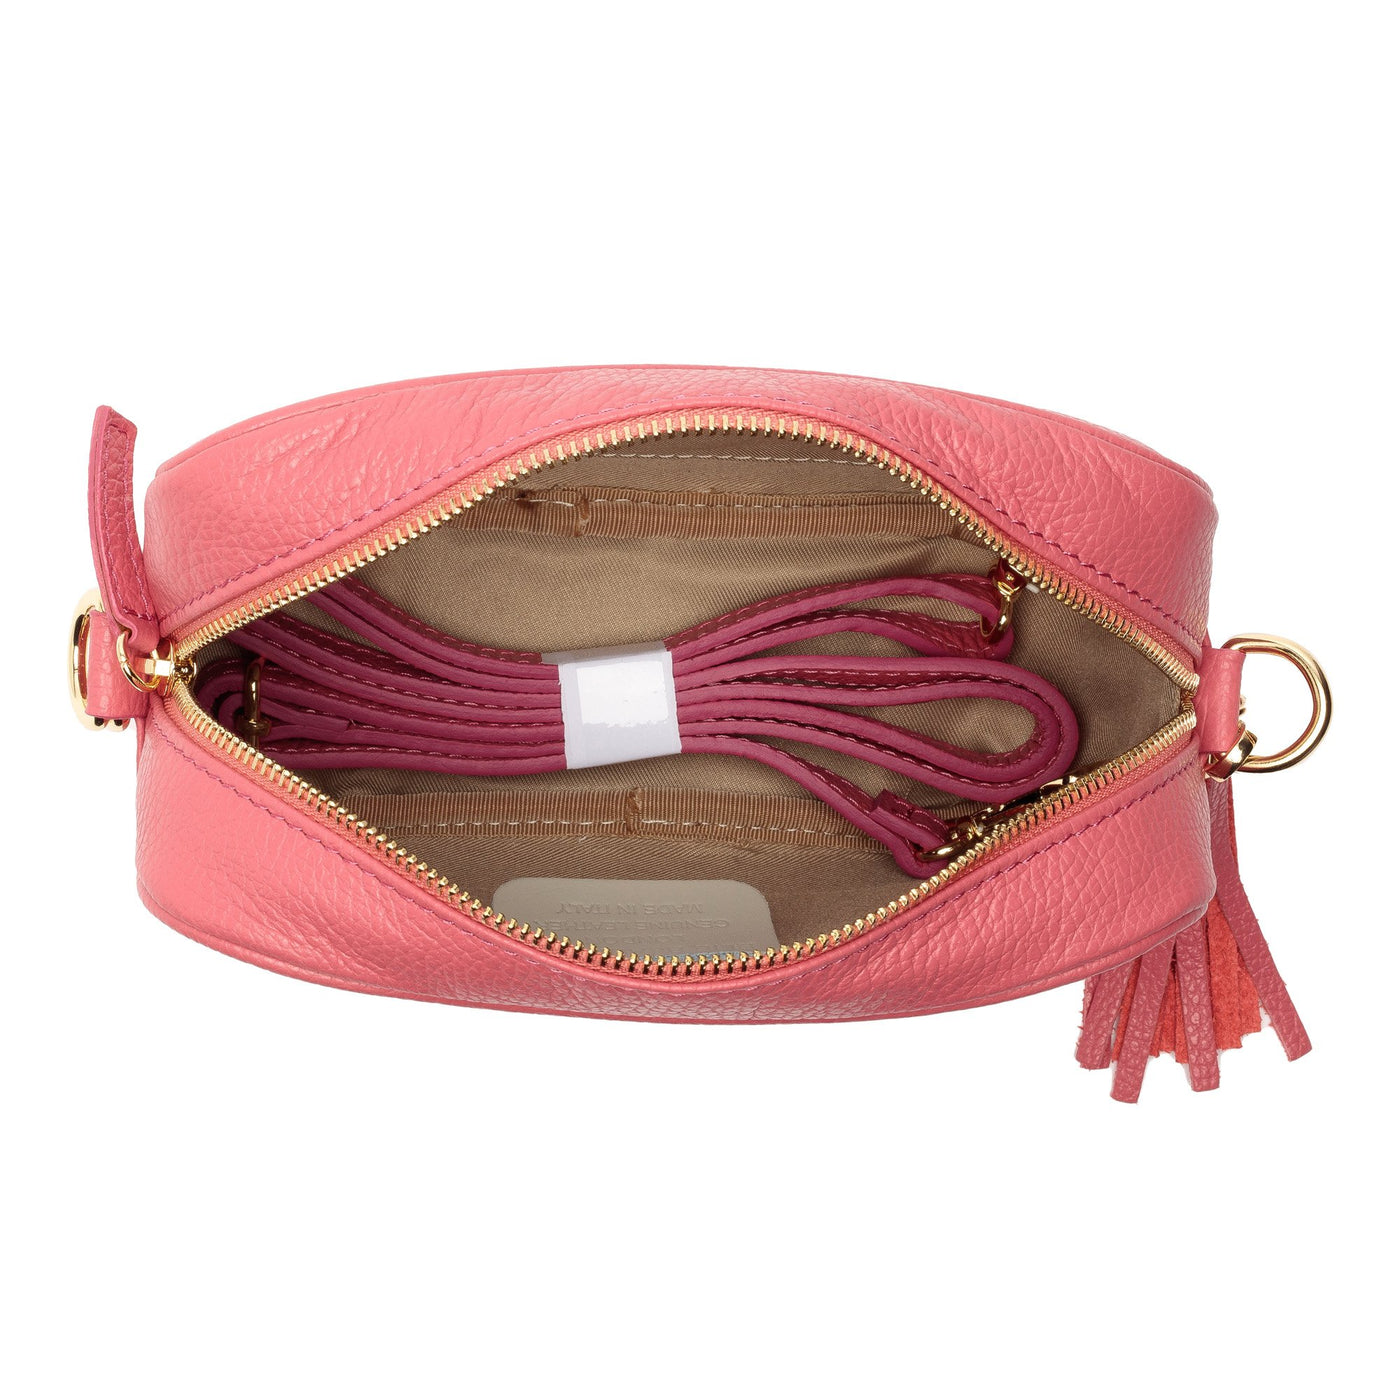 Elie Beaumont Designer Leather Crossbody Bag - Strawberry Pink (GOLD Fittings)